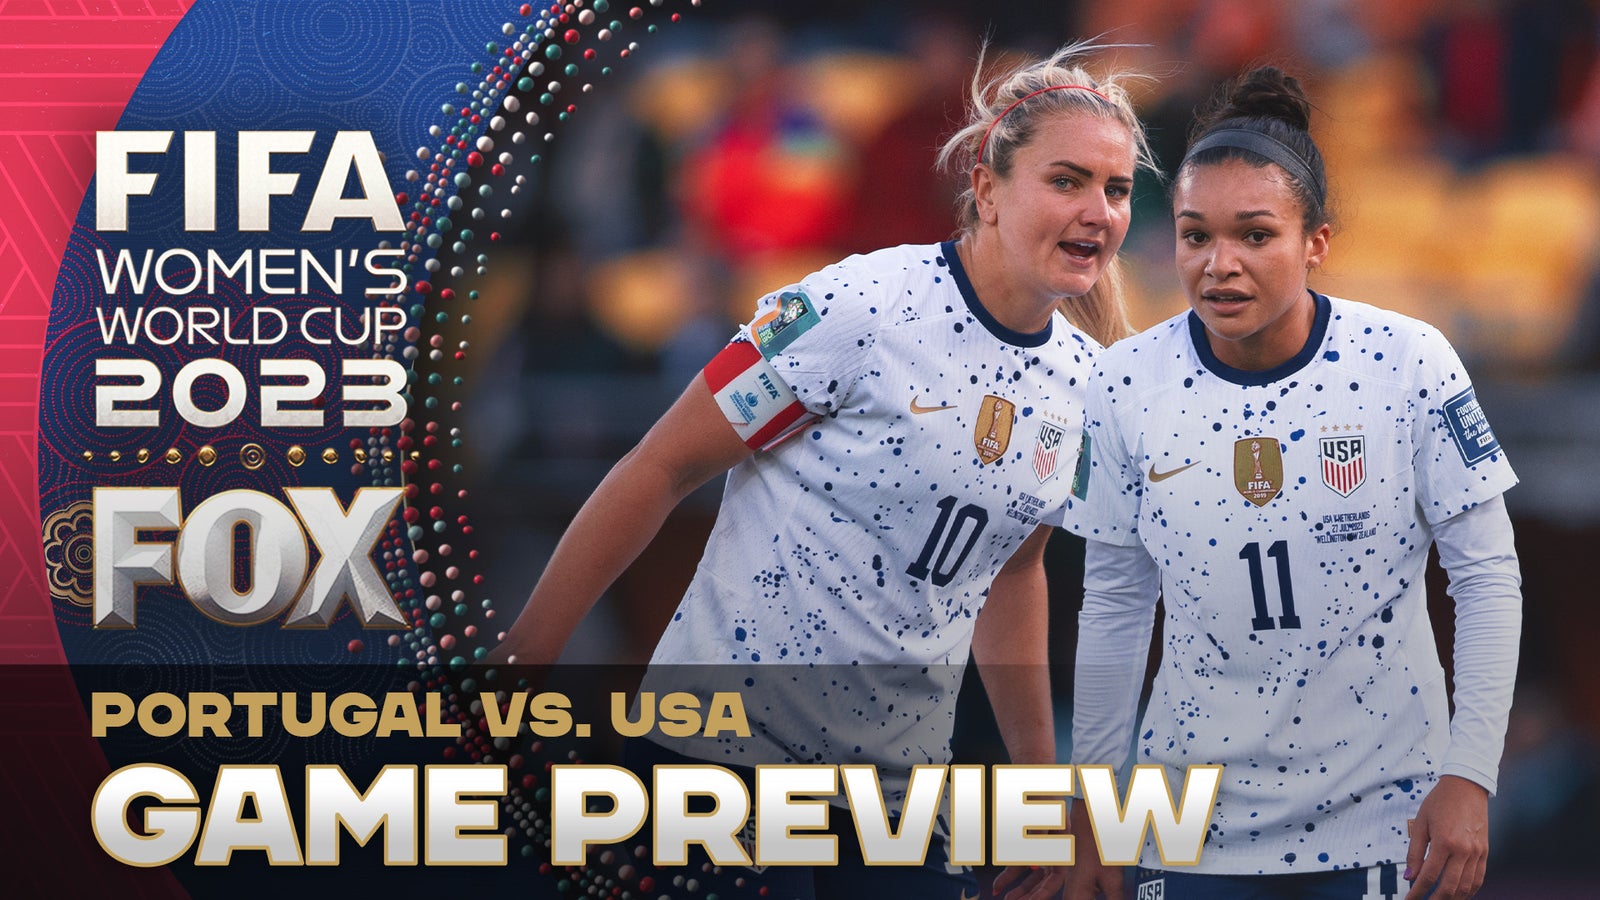 "They are the best when they are under pressure" - Alexi Lalas and the World Cup crew preview Portugal vs. the United States